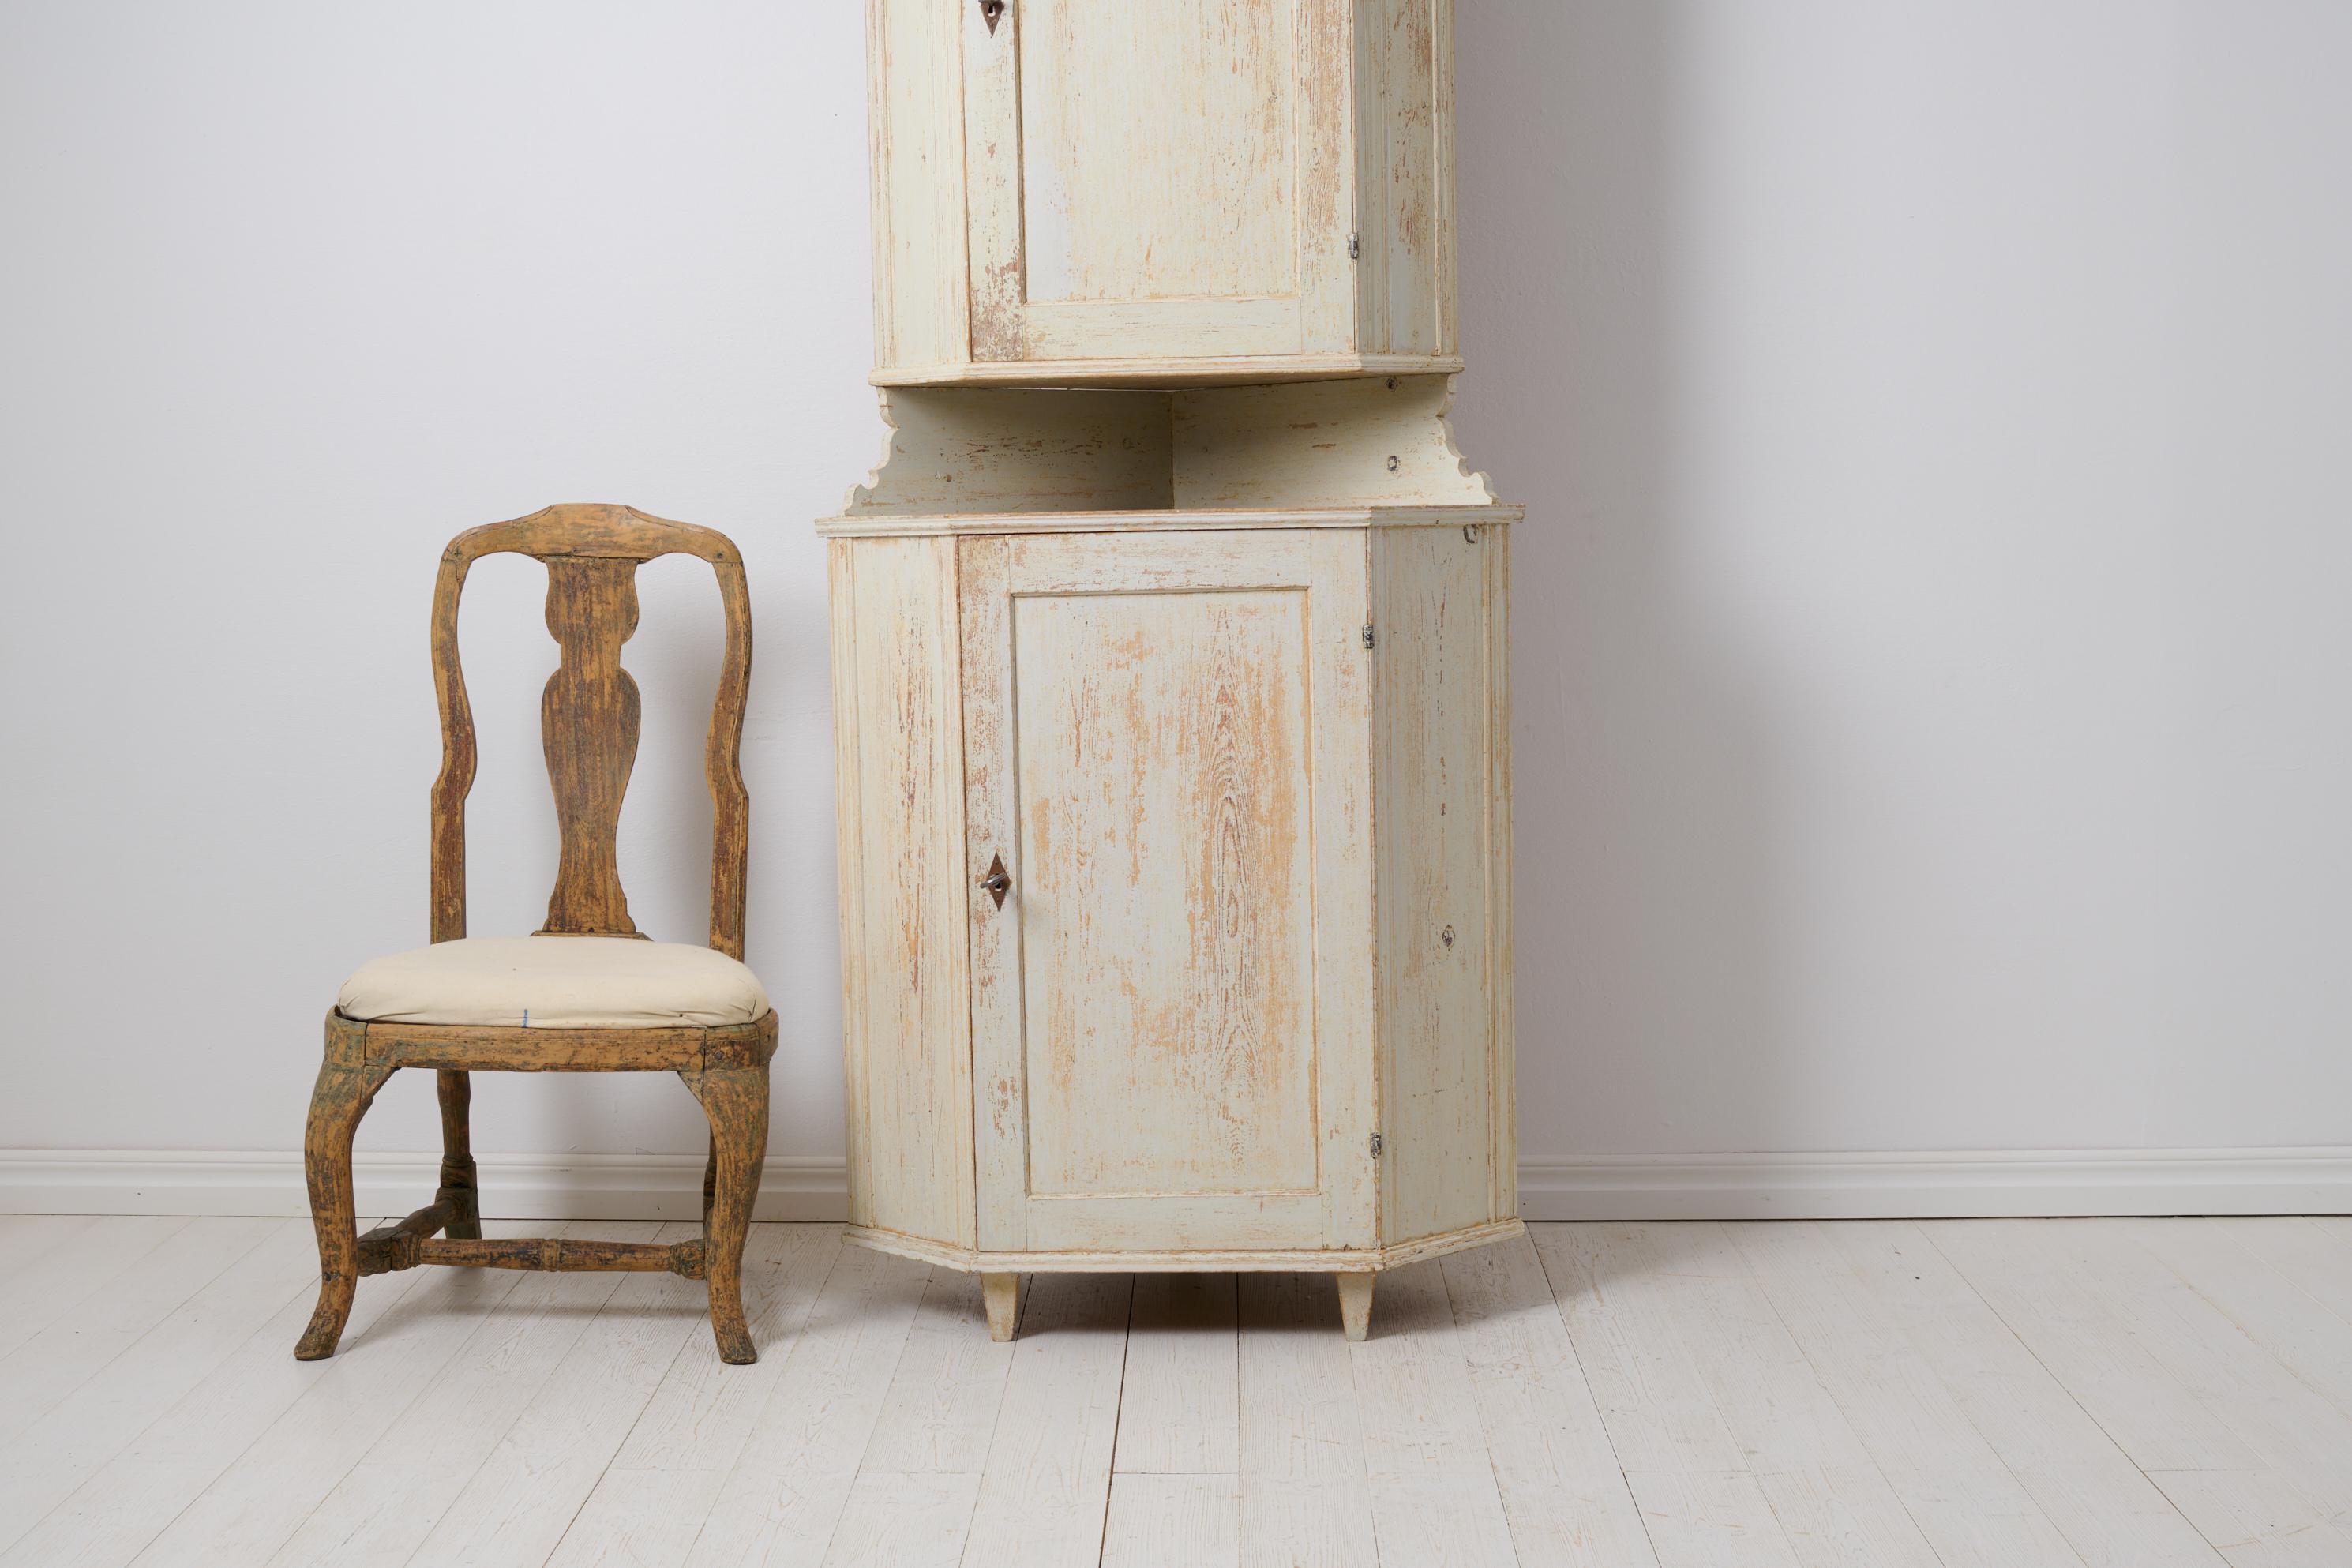 Antique Northern Swedish Country House White Gustavian Style Corner Cabinet In Good Condition For Sale In Kramfors, SE